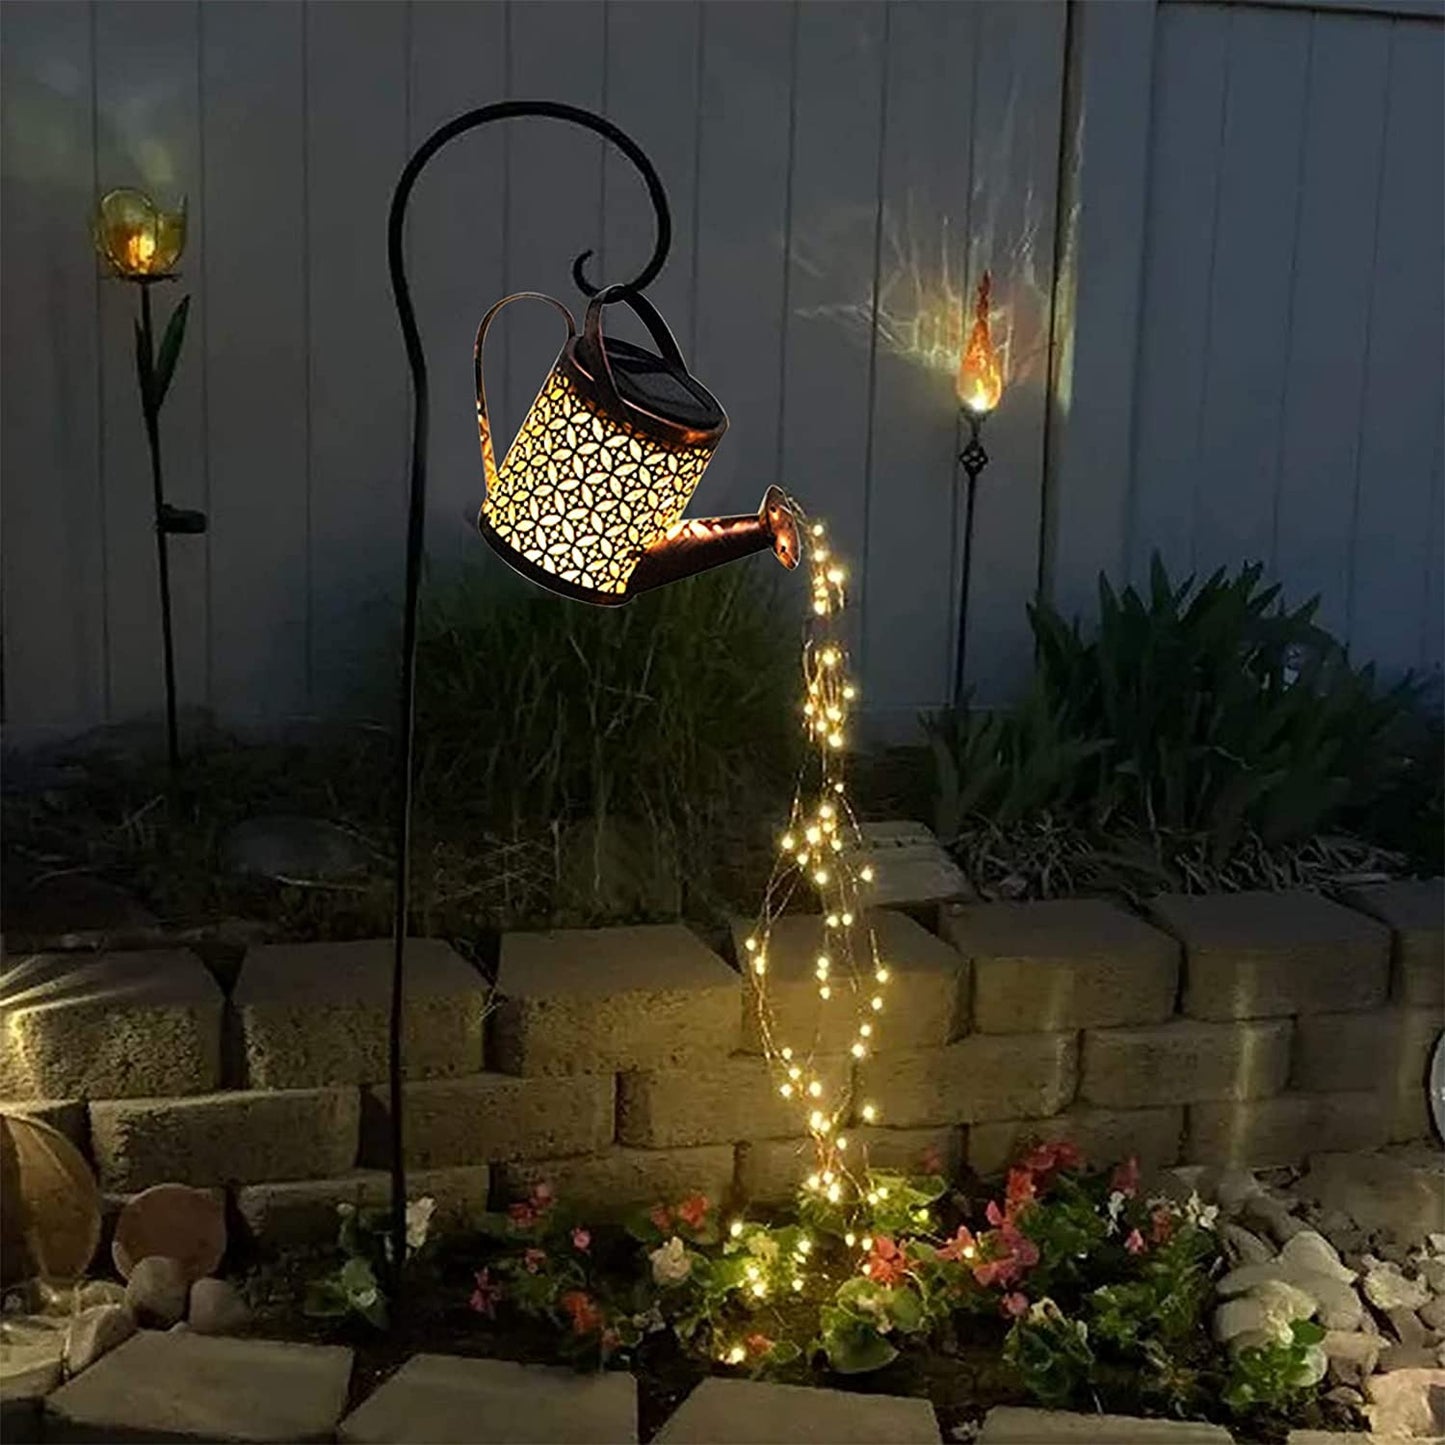 A garden décor item which is a small solar powered watering can with fairy lights coming out of the spout in a garden at night.